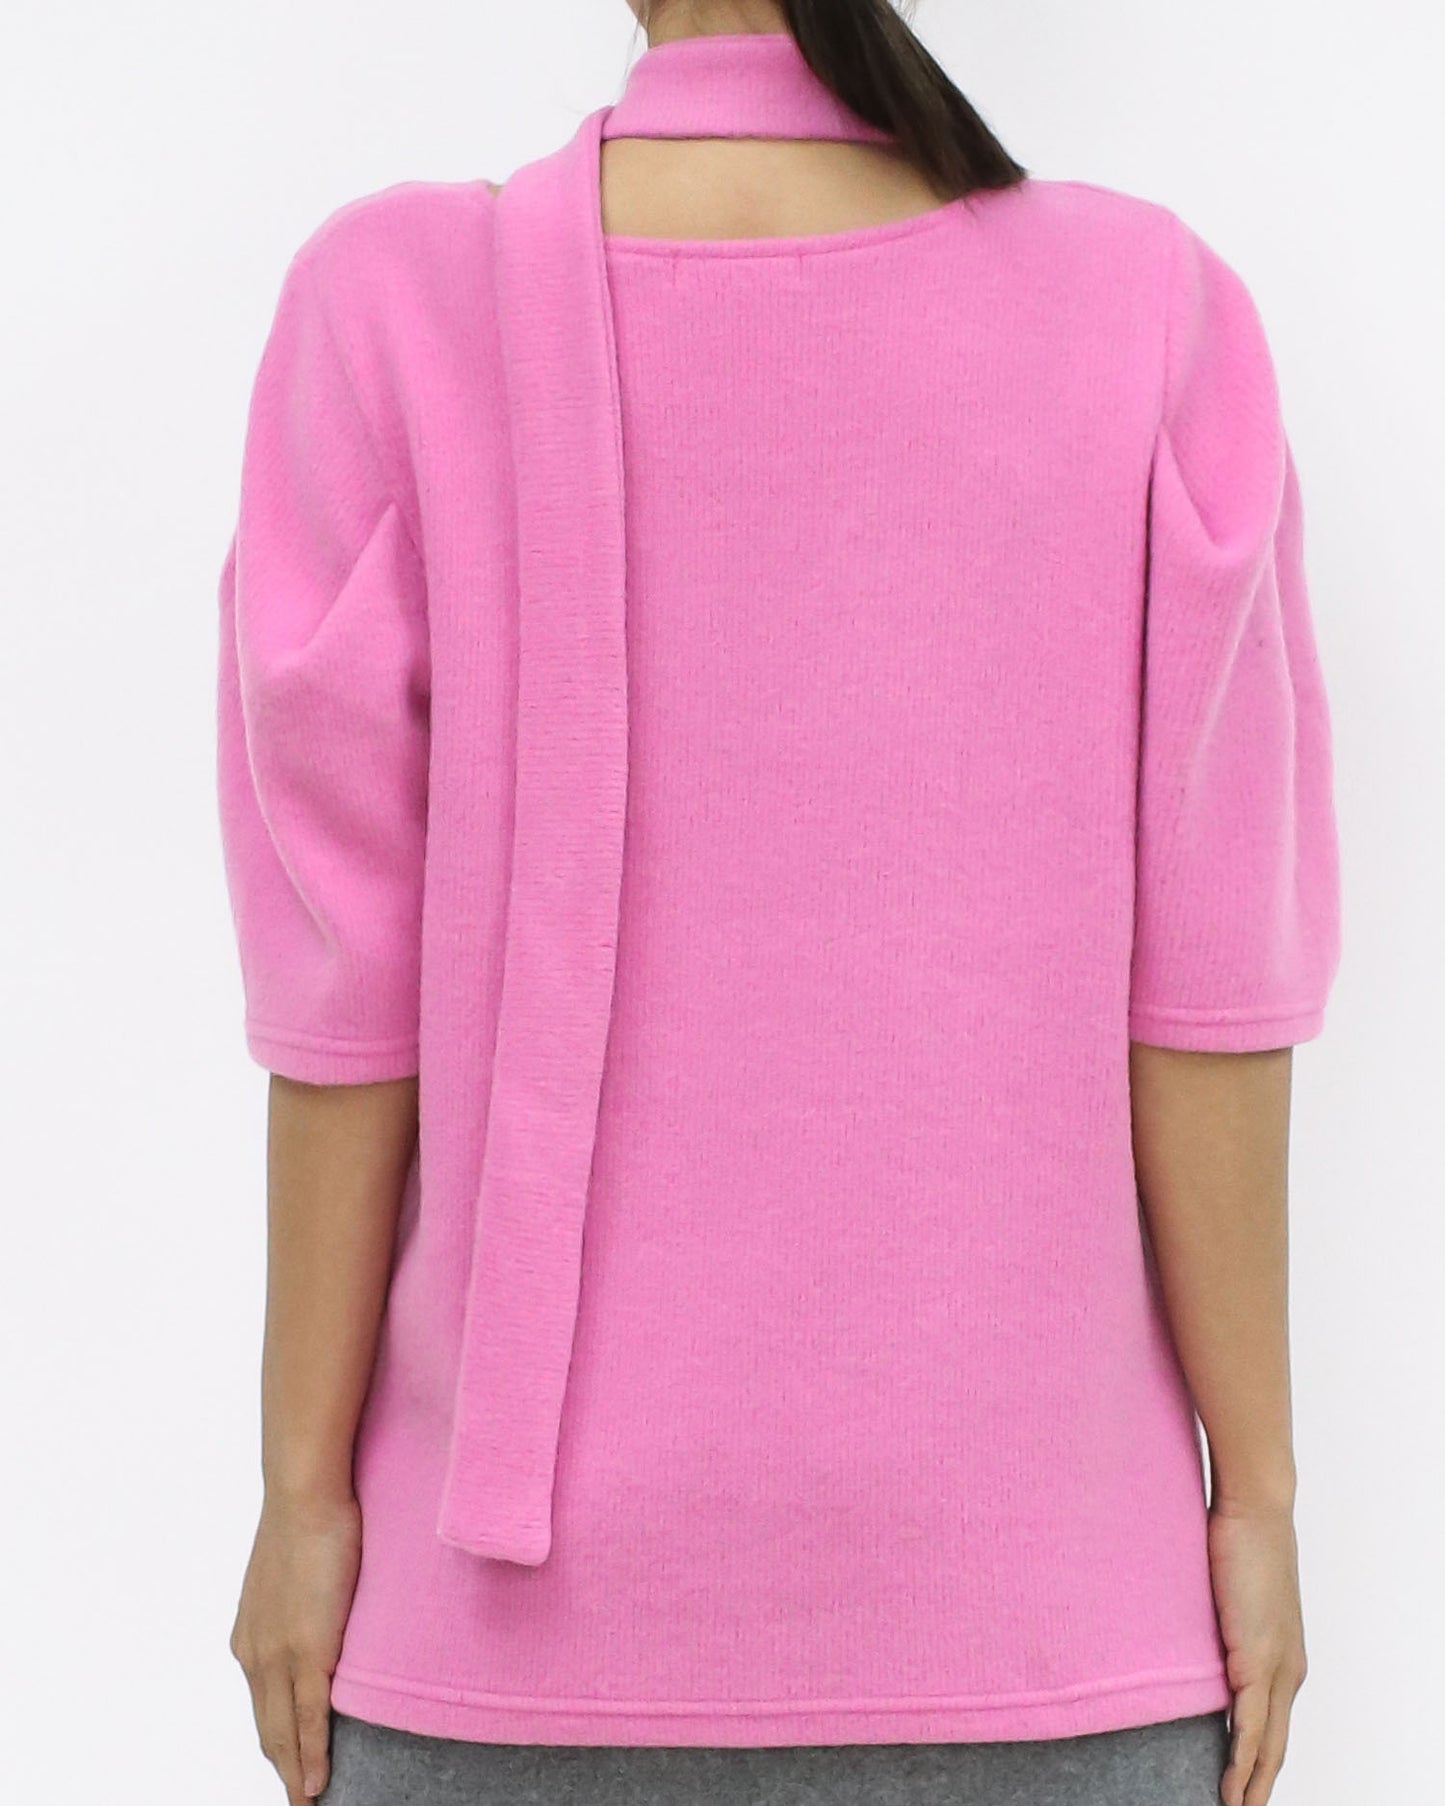 pink puff shoulder knitted top w/ wrap neck strap